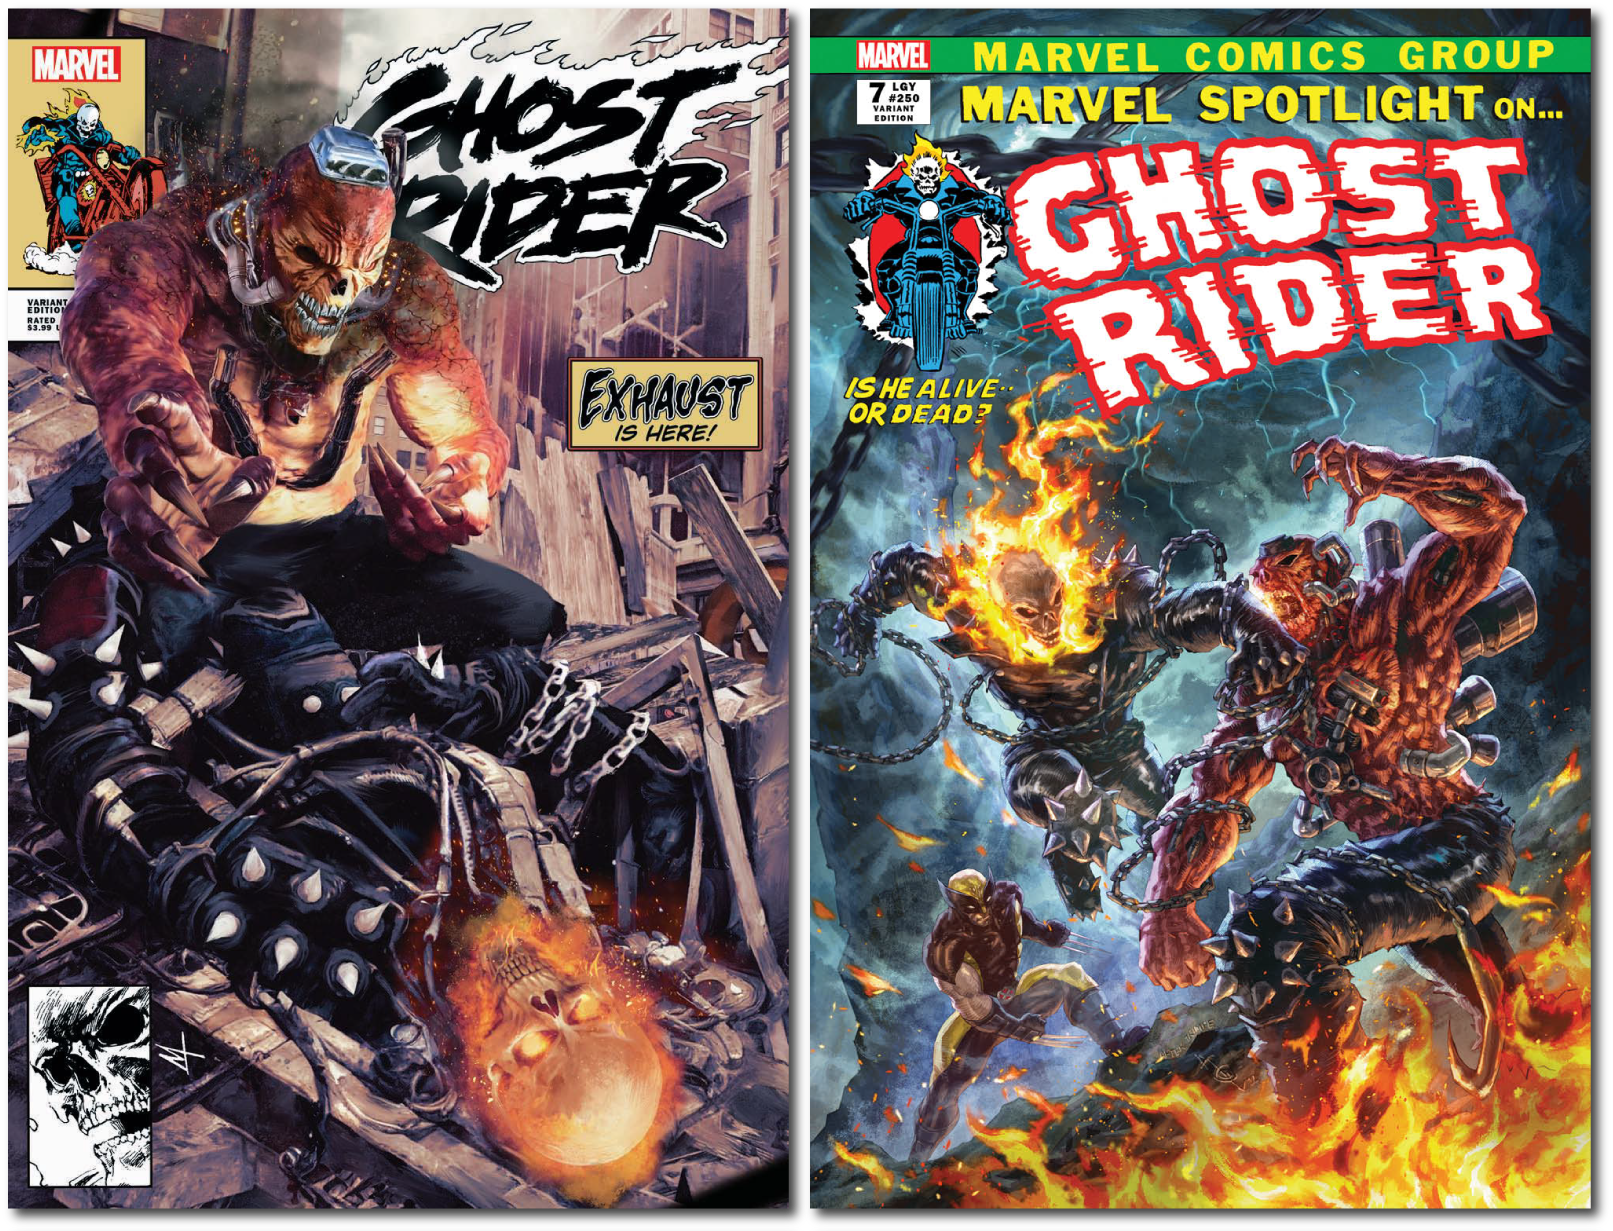 2 PACK (616) TRADE GHOST RIDER #7 UNKNOWN COMICS ALAN QUAH / MARCO TURINI EXCLUSIVE VAR (10/26/2022)